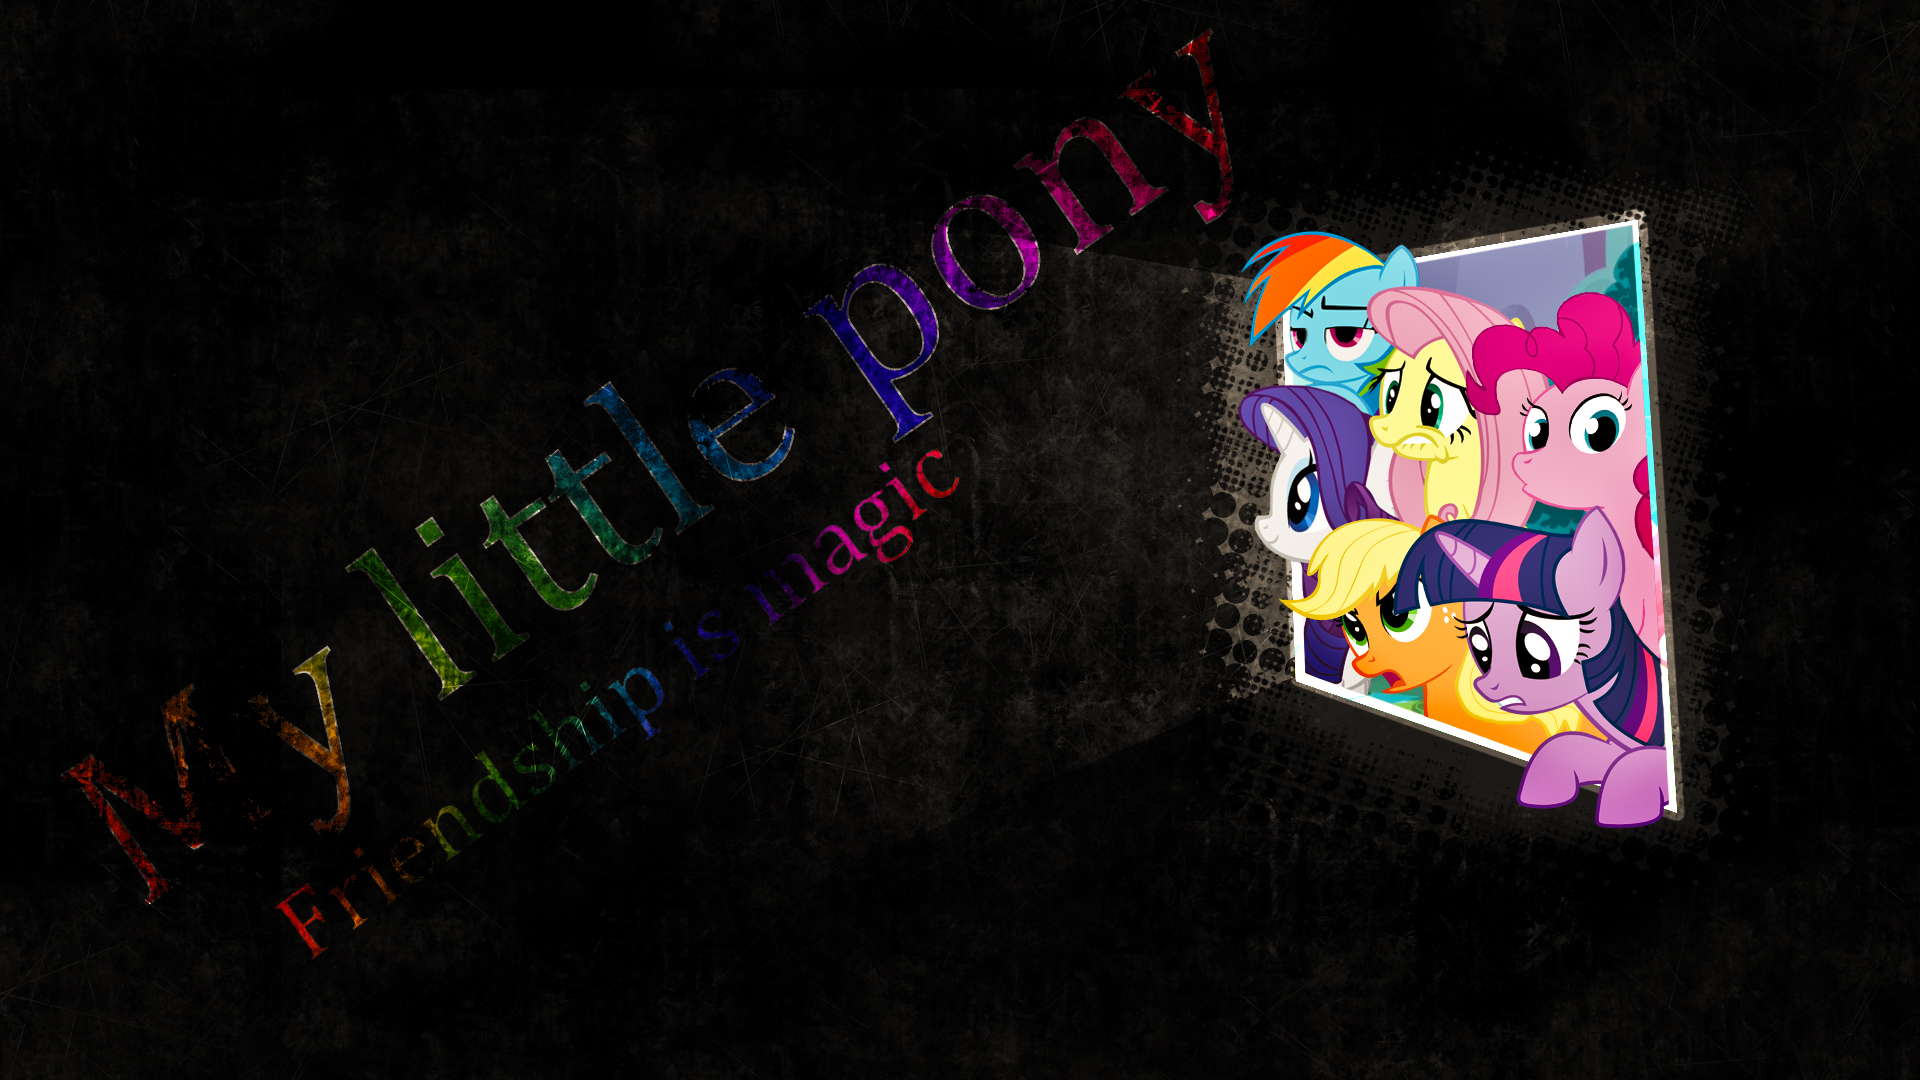 My little pony wallpapers pack 3 by Galen177